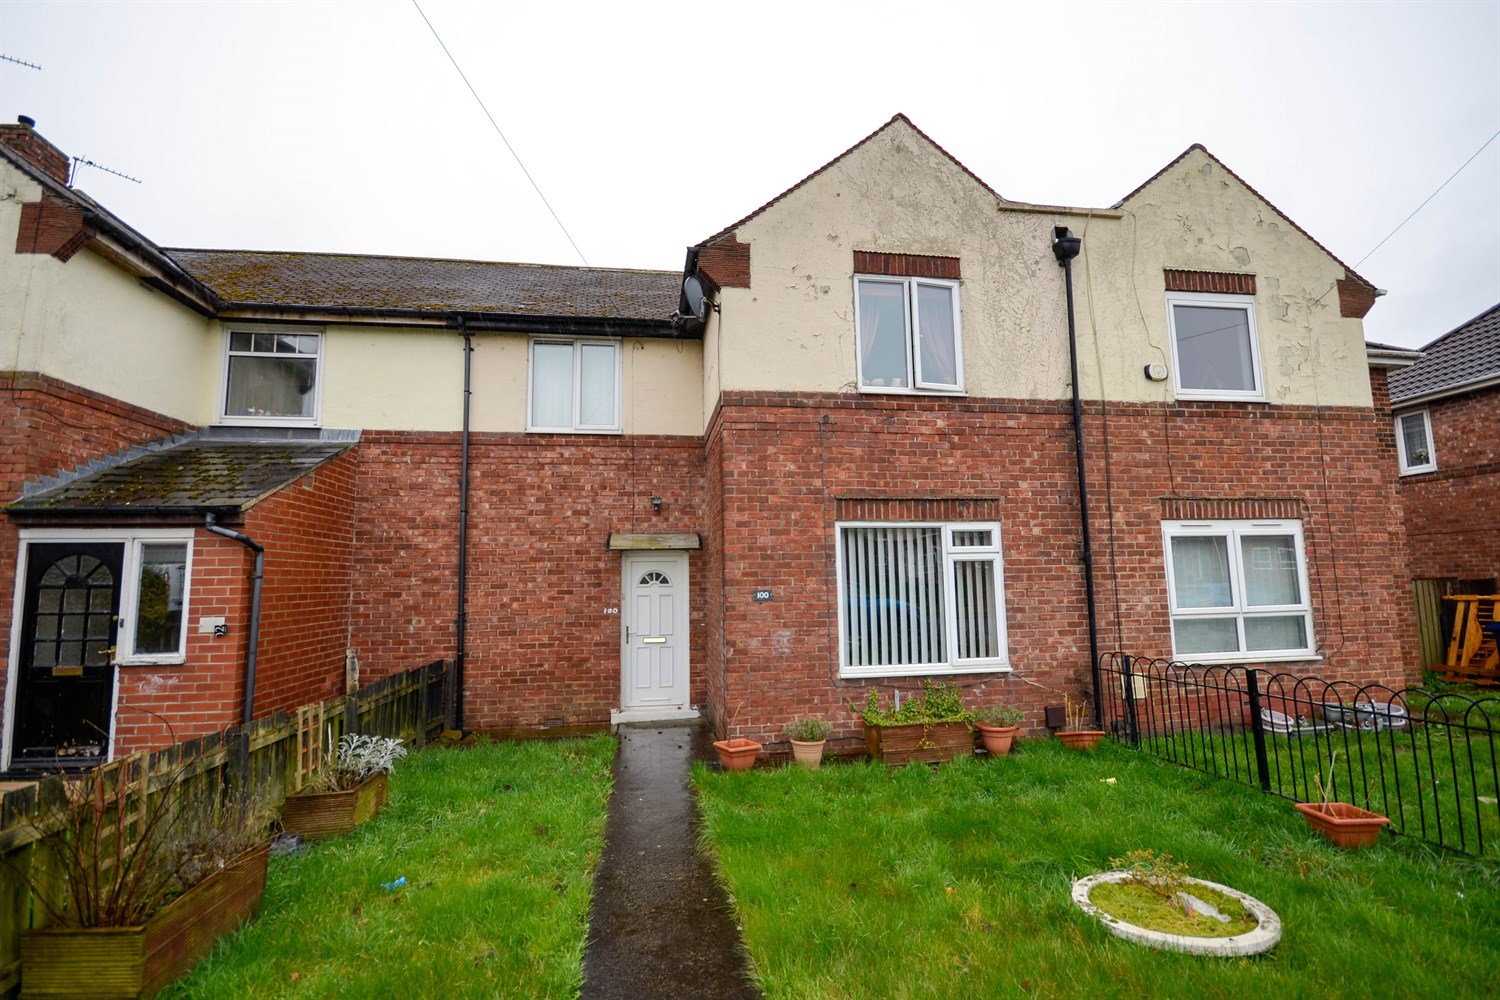 3 bed house for sale in Lansbury Drive, Birtley - Property Image 1